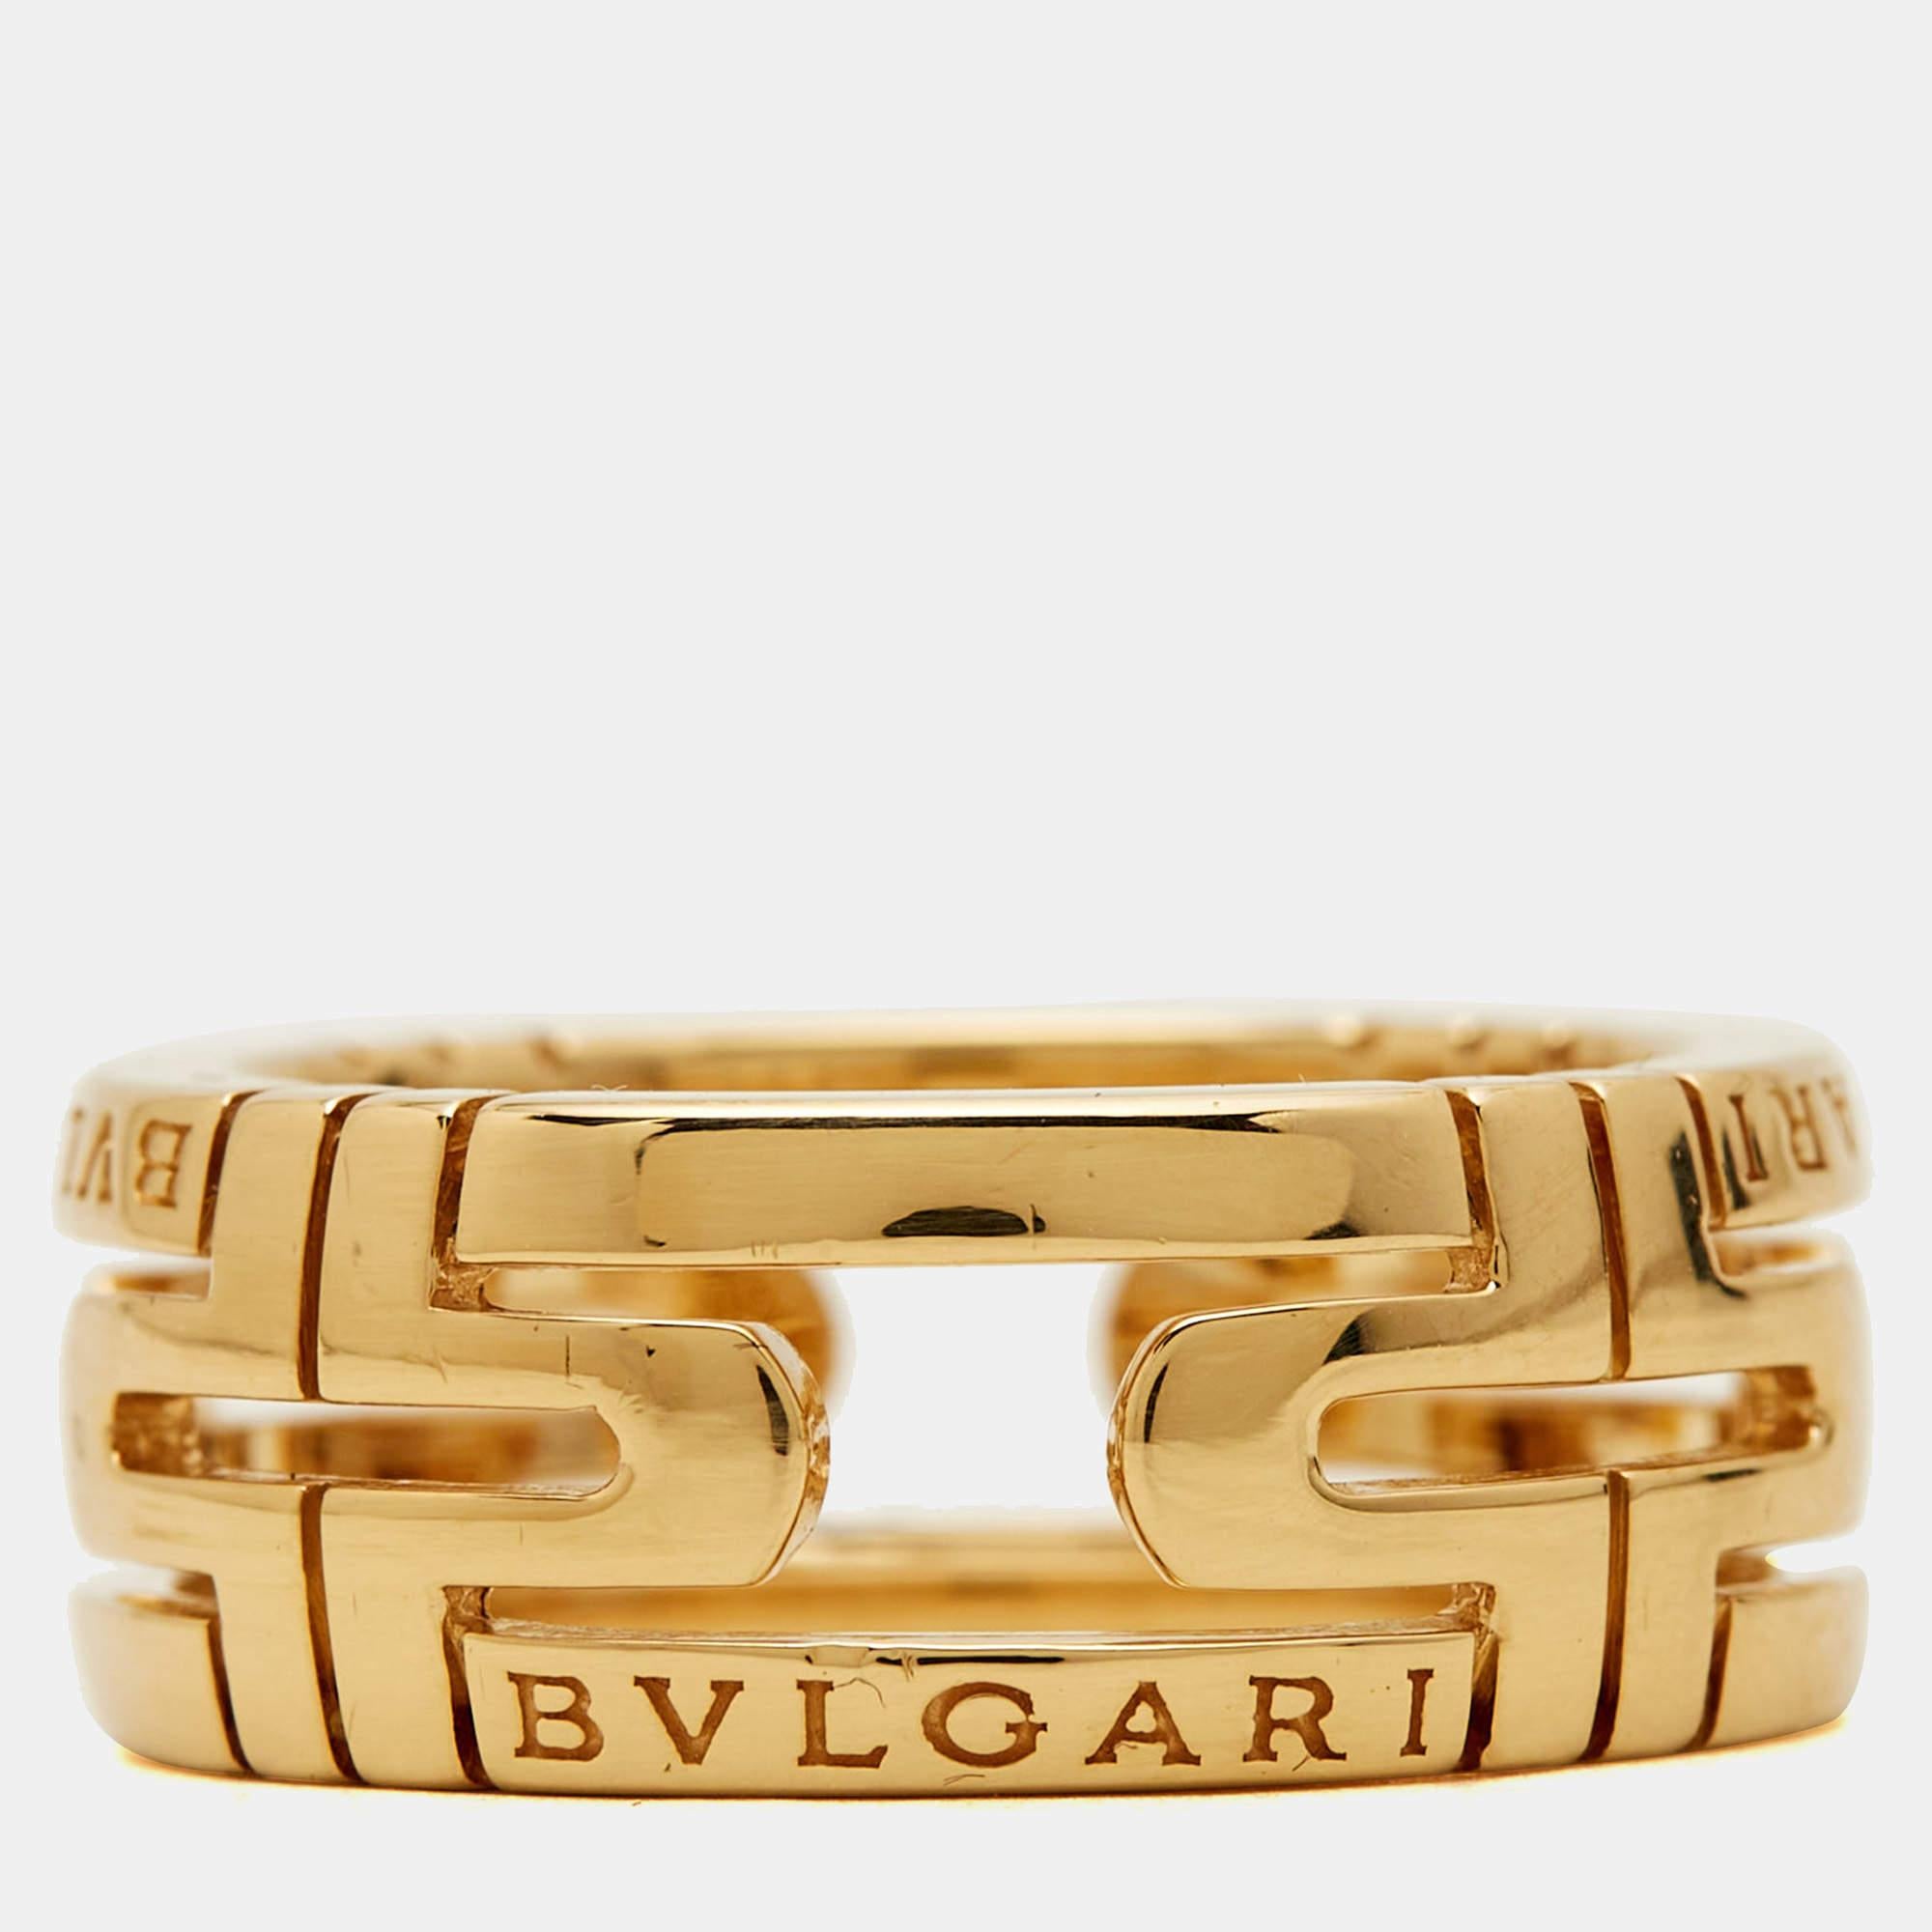 The Bvlgari ring is an exquisite piece of jewelry exuding elegance and luxury. Crafted from gleaming 18k yellow gold, its design features the iconic Parentesi motif, showcasing a timeless blend of sophistication and craftsmanship. A symbol of